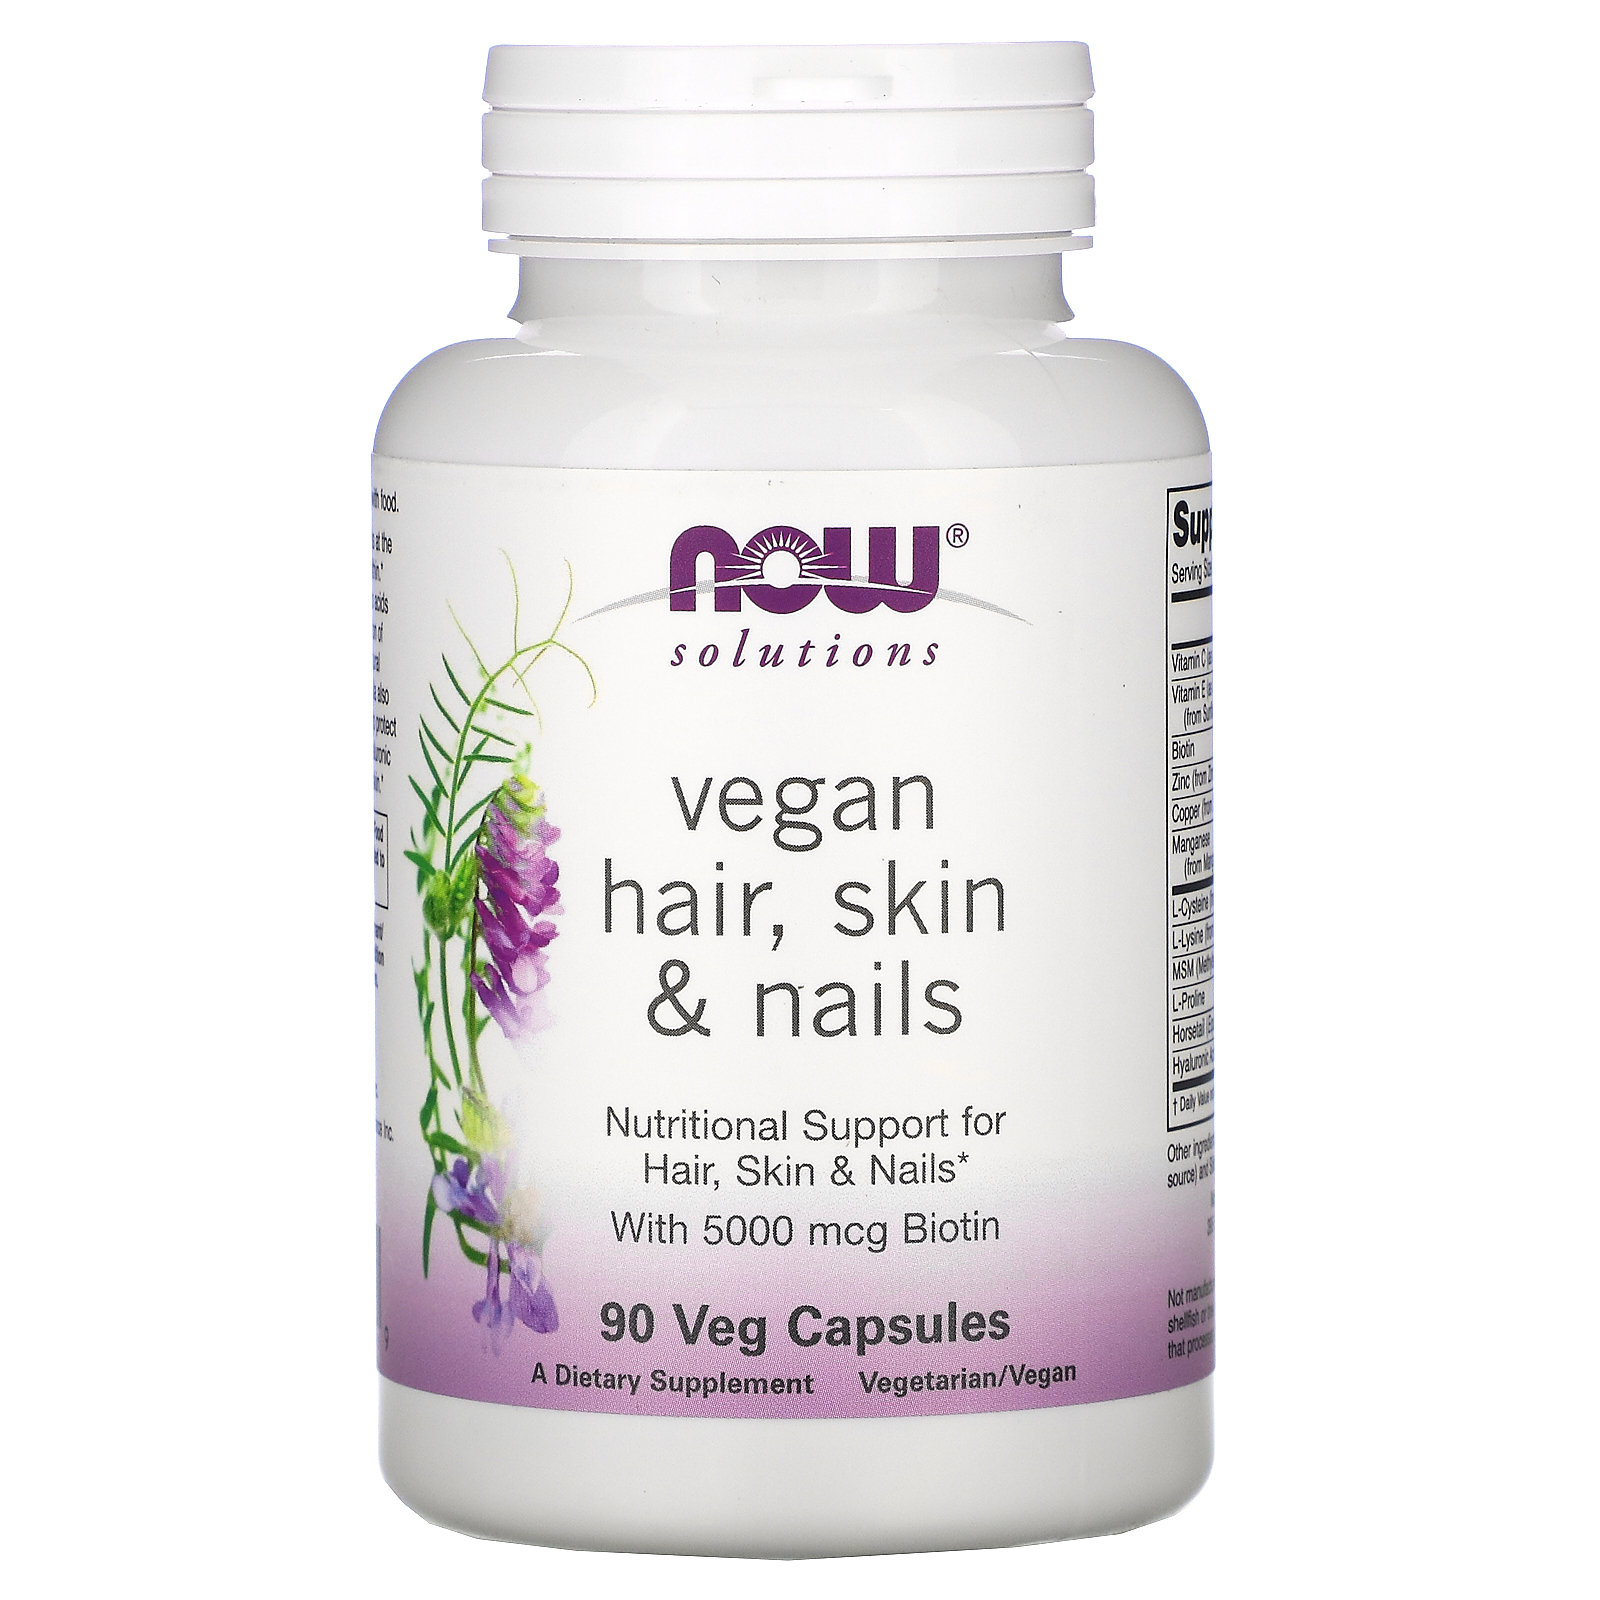 NOW SOLUTIONS VEGAN HAIR,SKIN & NAILS NUTRITIONAL SUPPORT – Unique Pharmacy